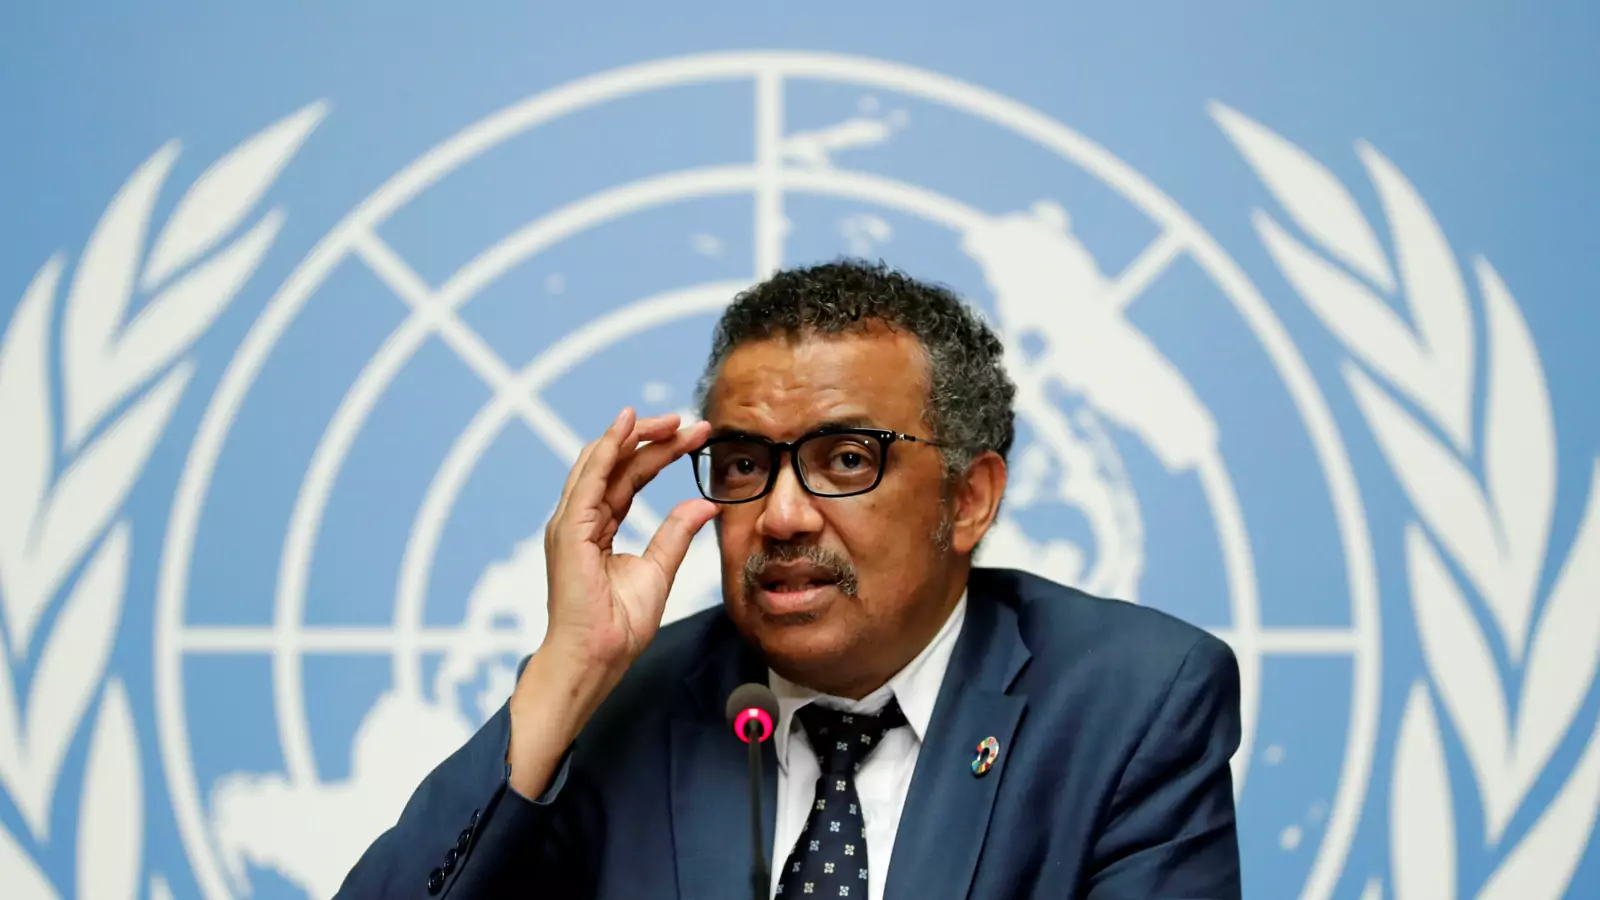 A Scorecard for Dr. Tedros as the WHO&#39;s Director-General | Council on Foreign Relations